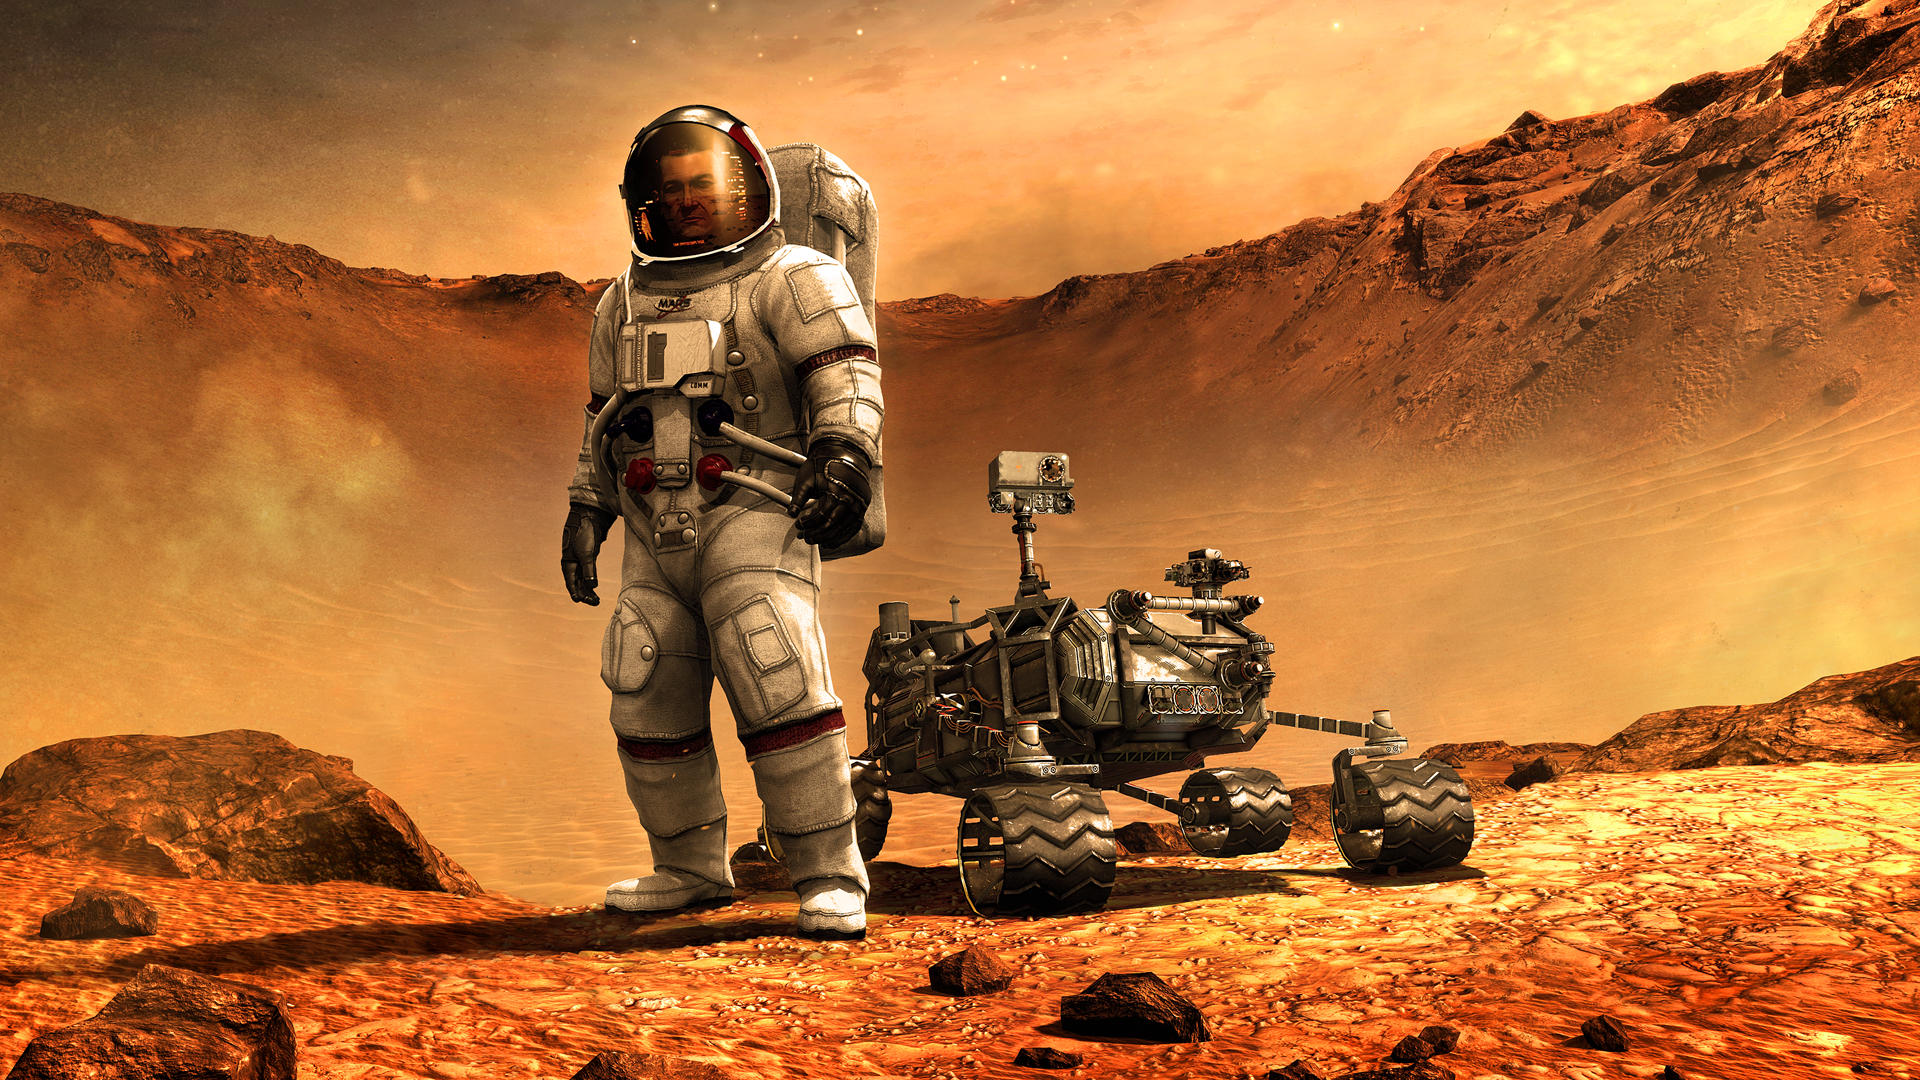 Take On Mars Launches Next Month With Story Campaign news.